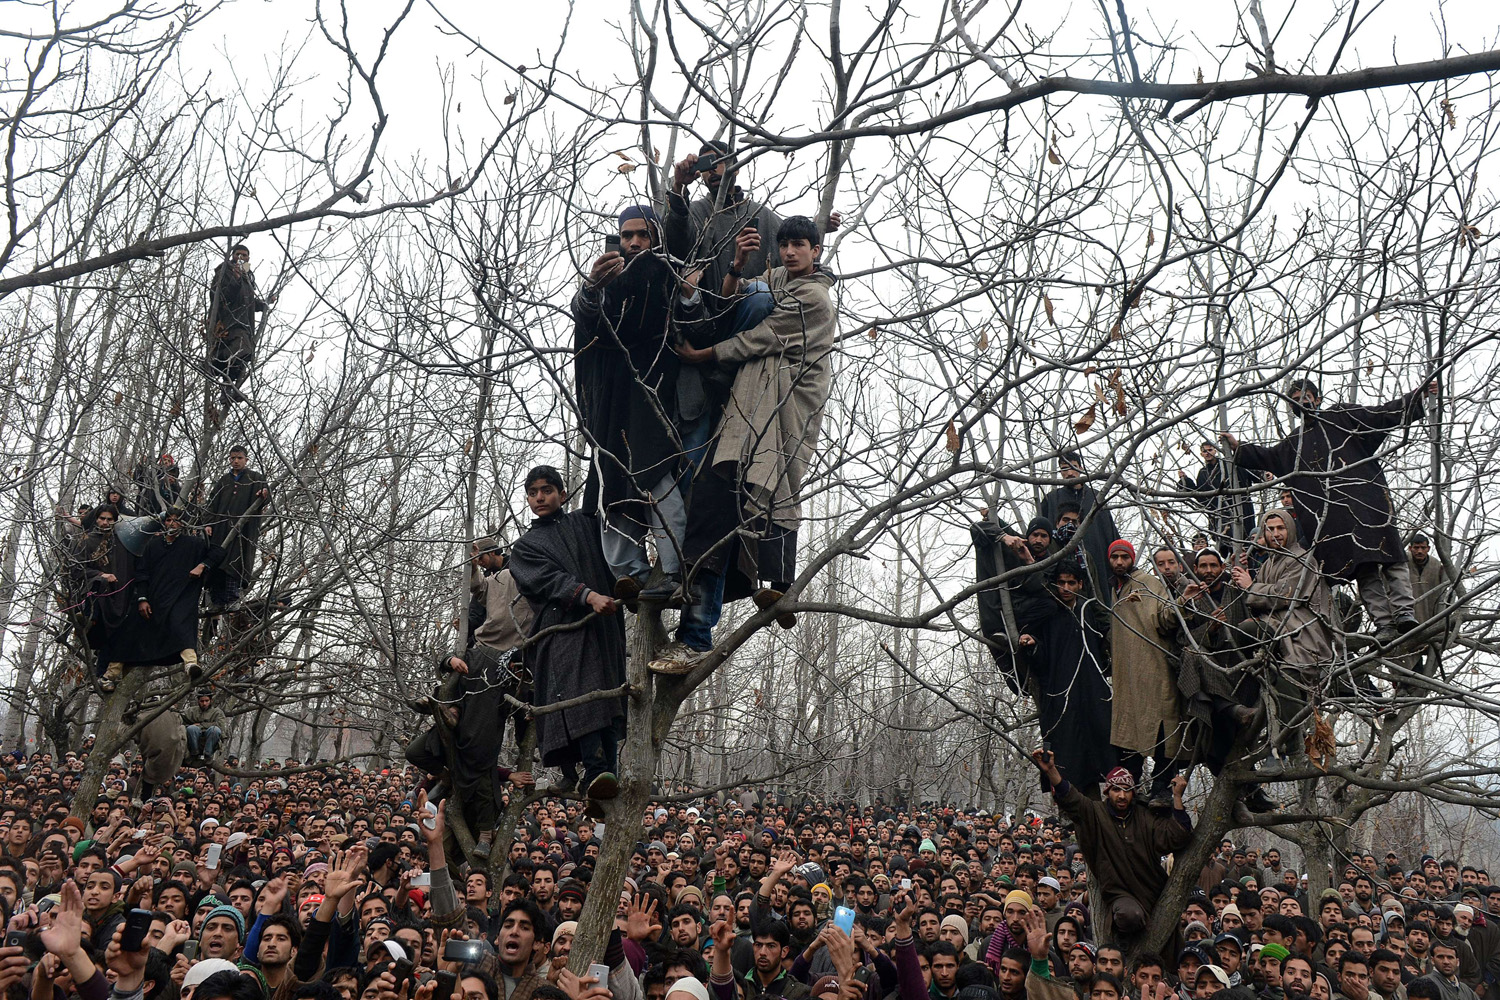 Feb. 14, 2014. Kashmiri villagers shout pro-freedom slogans during the funeral of alleged Hizbul Mujahideen militant Arshid Ahmed in Shopian, some 60 kms south of Srinagar, Kashmir.